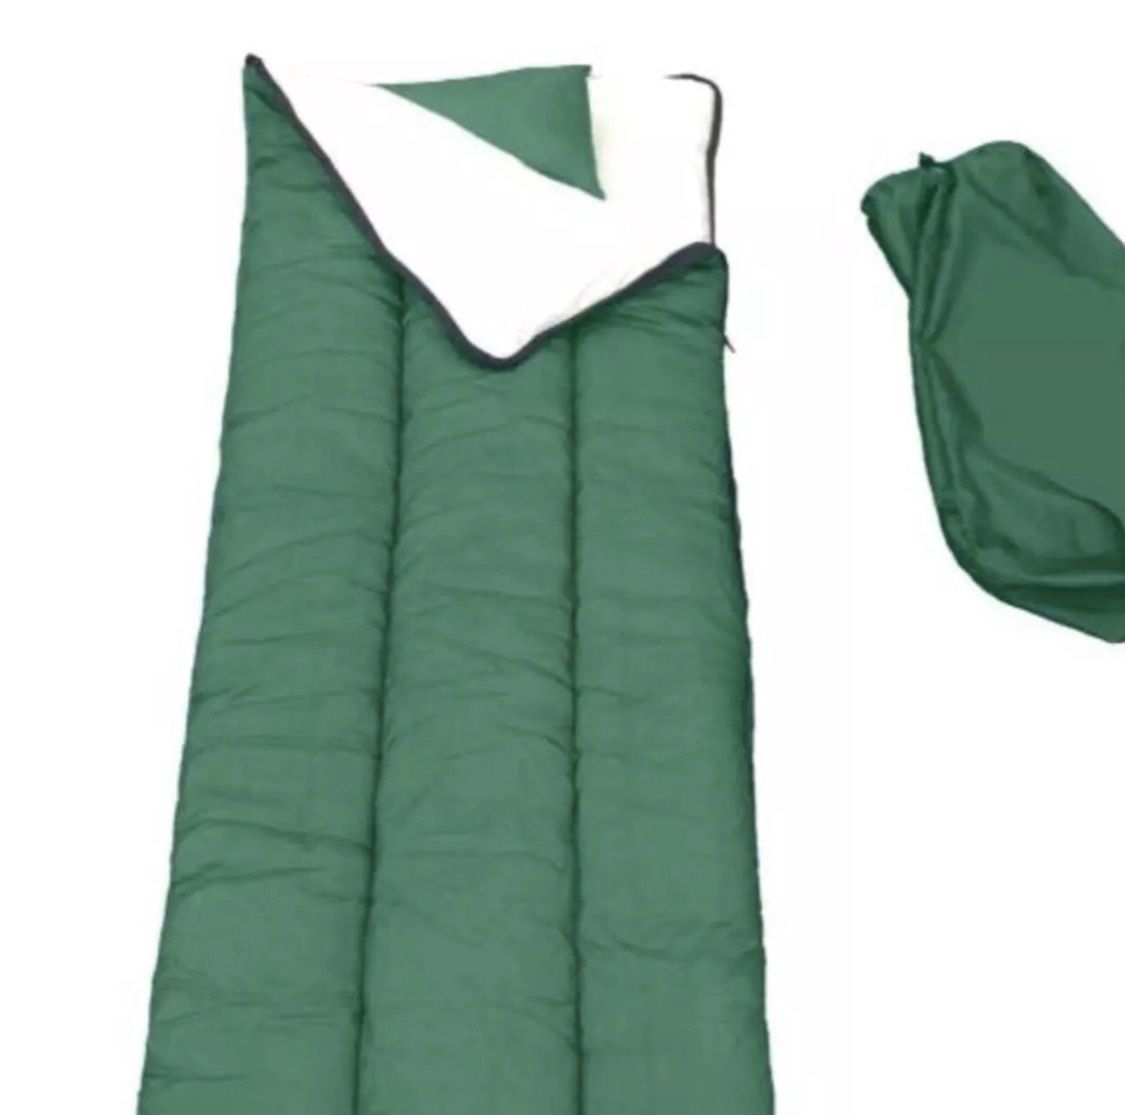 Light weight Military Army Sleeping Bag great for Cold weather